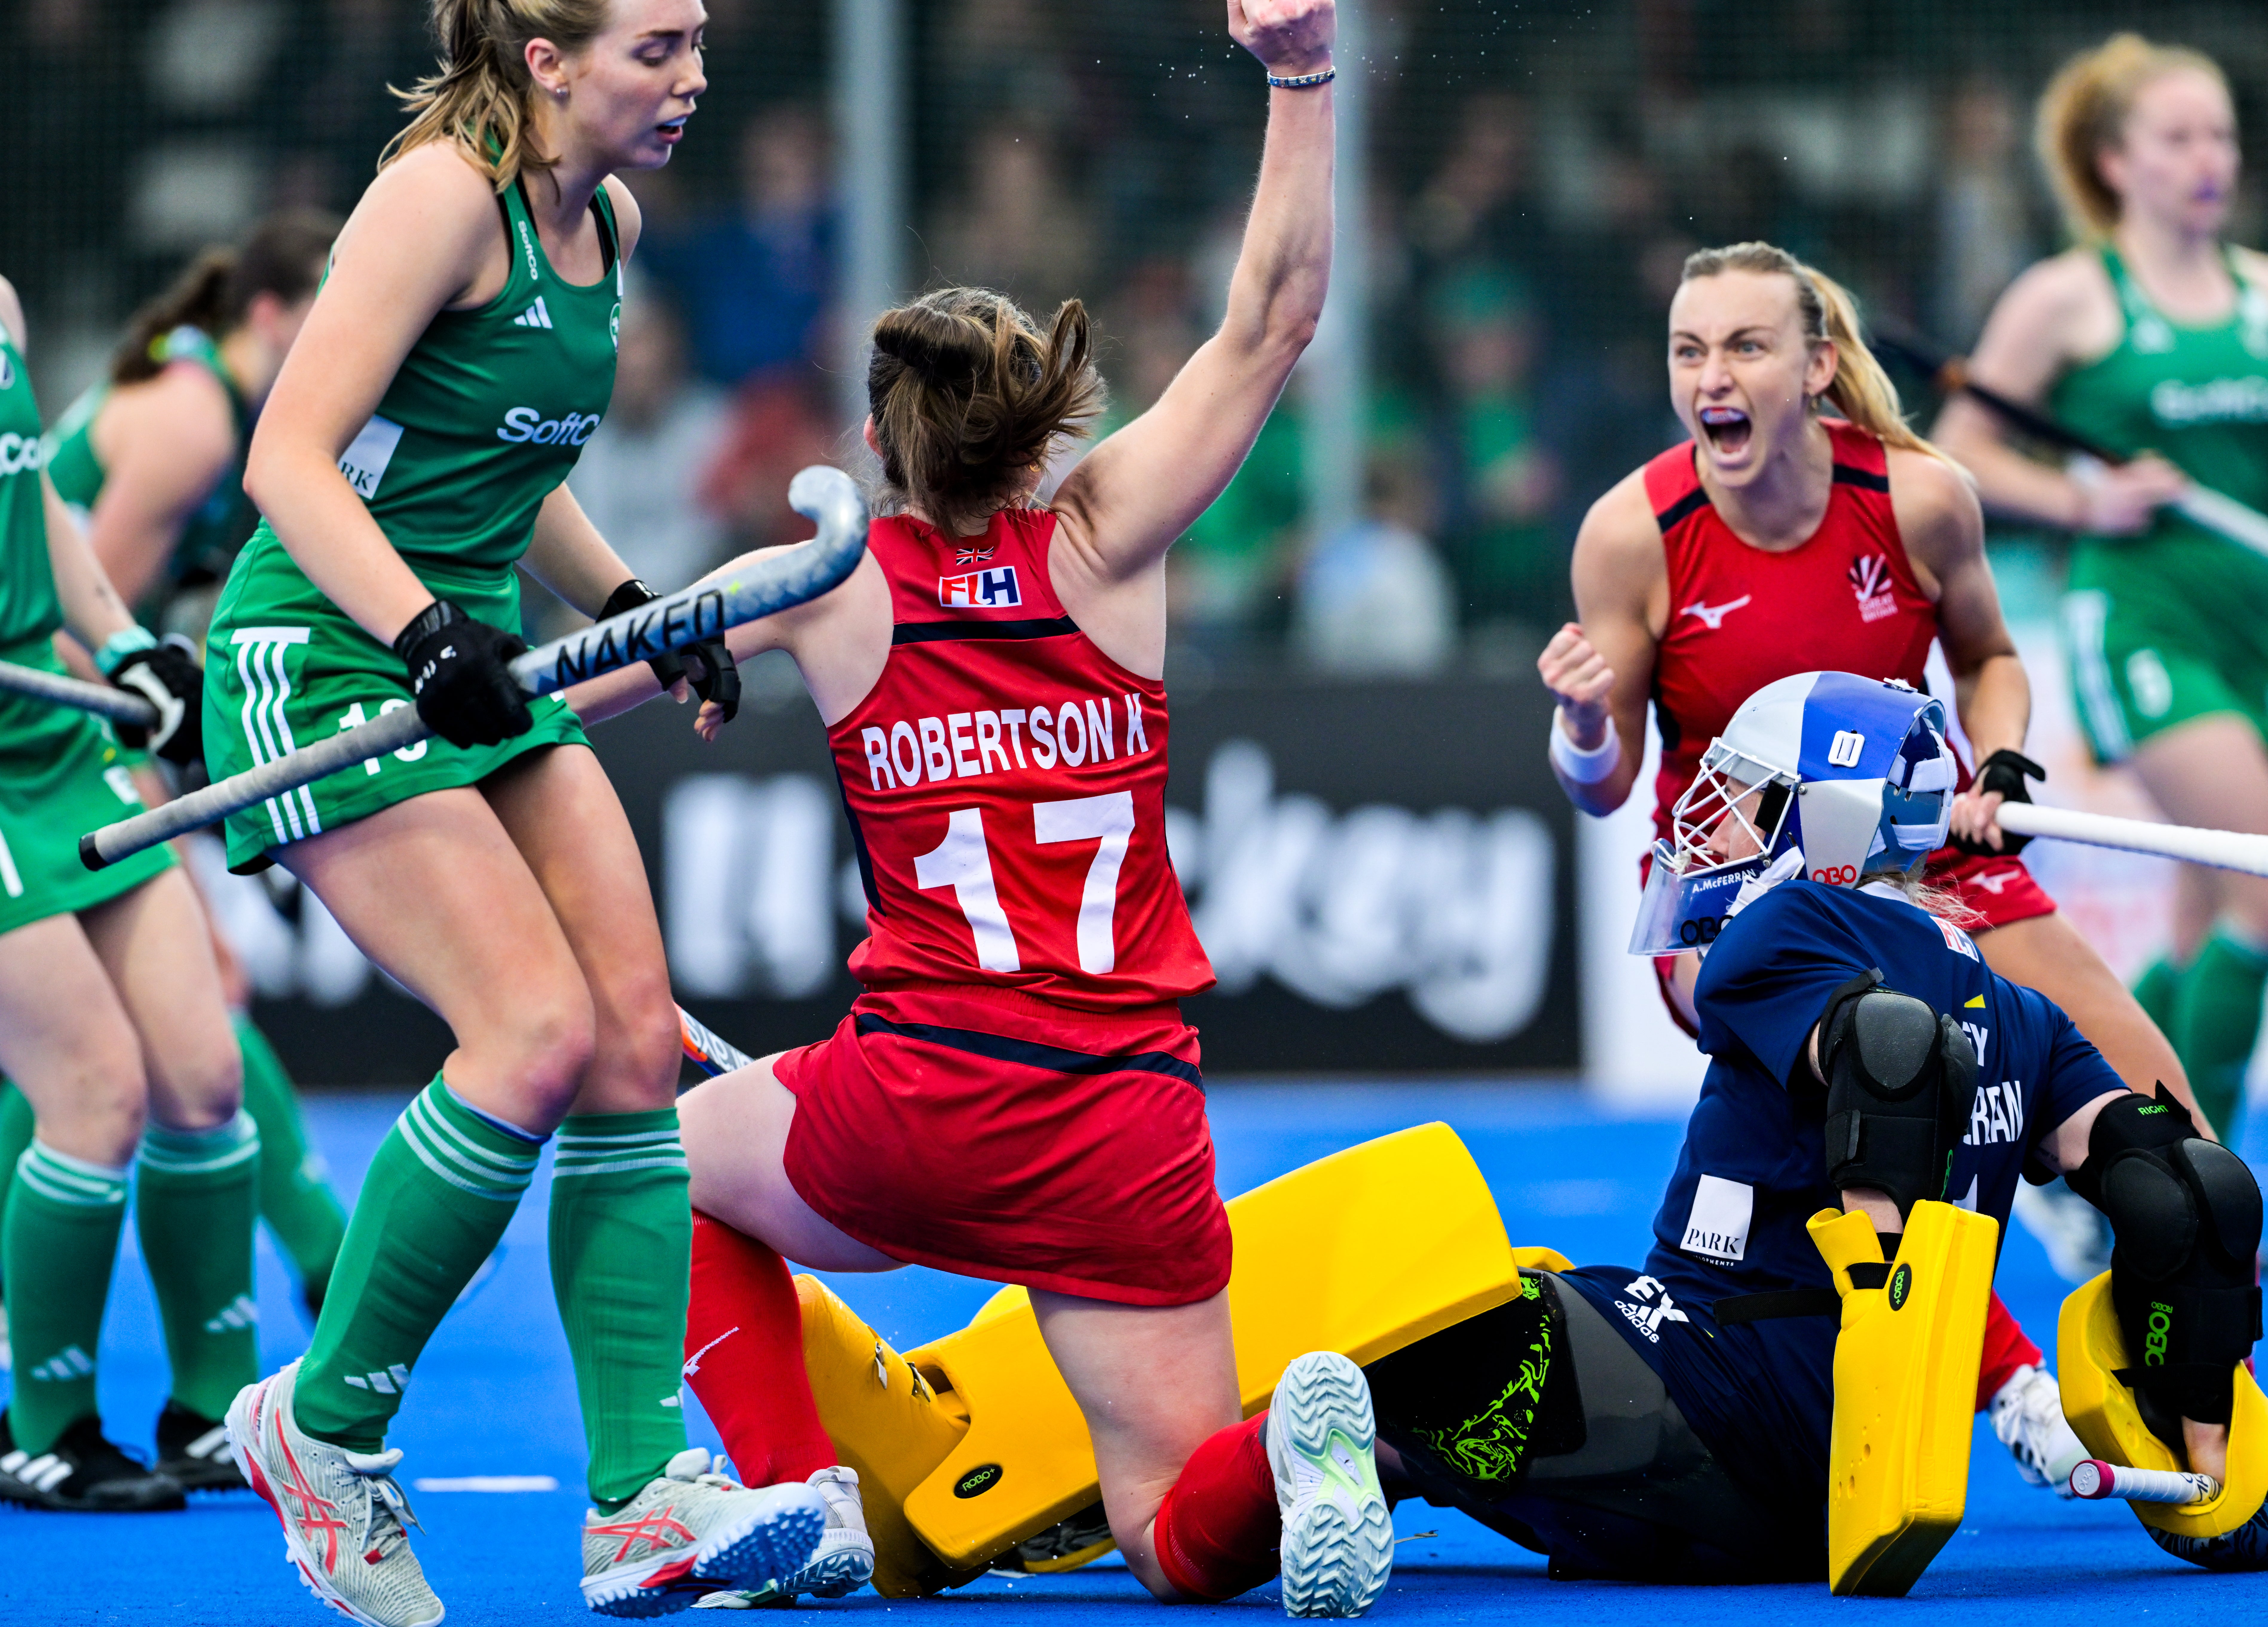 Katie Robertson after scoring the winning goal for GB